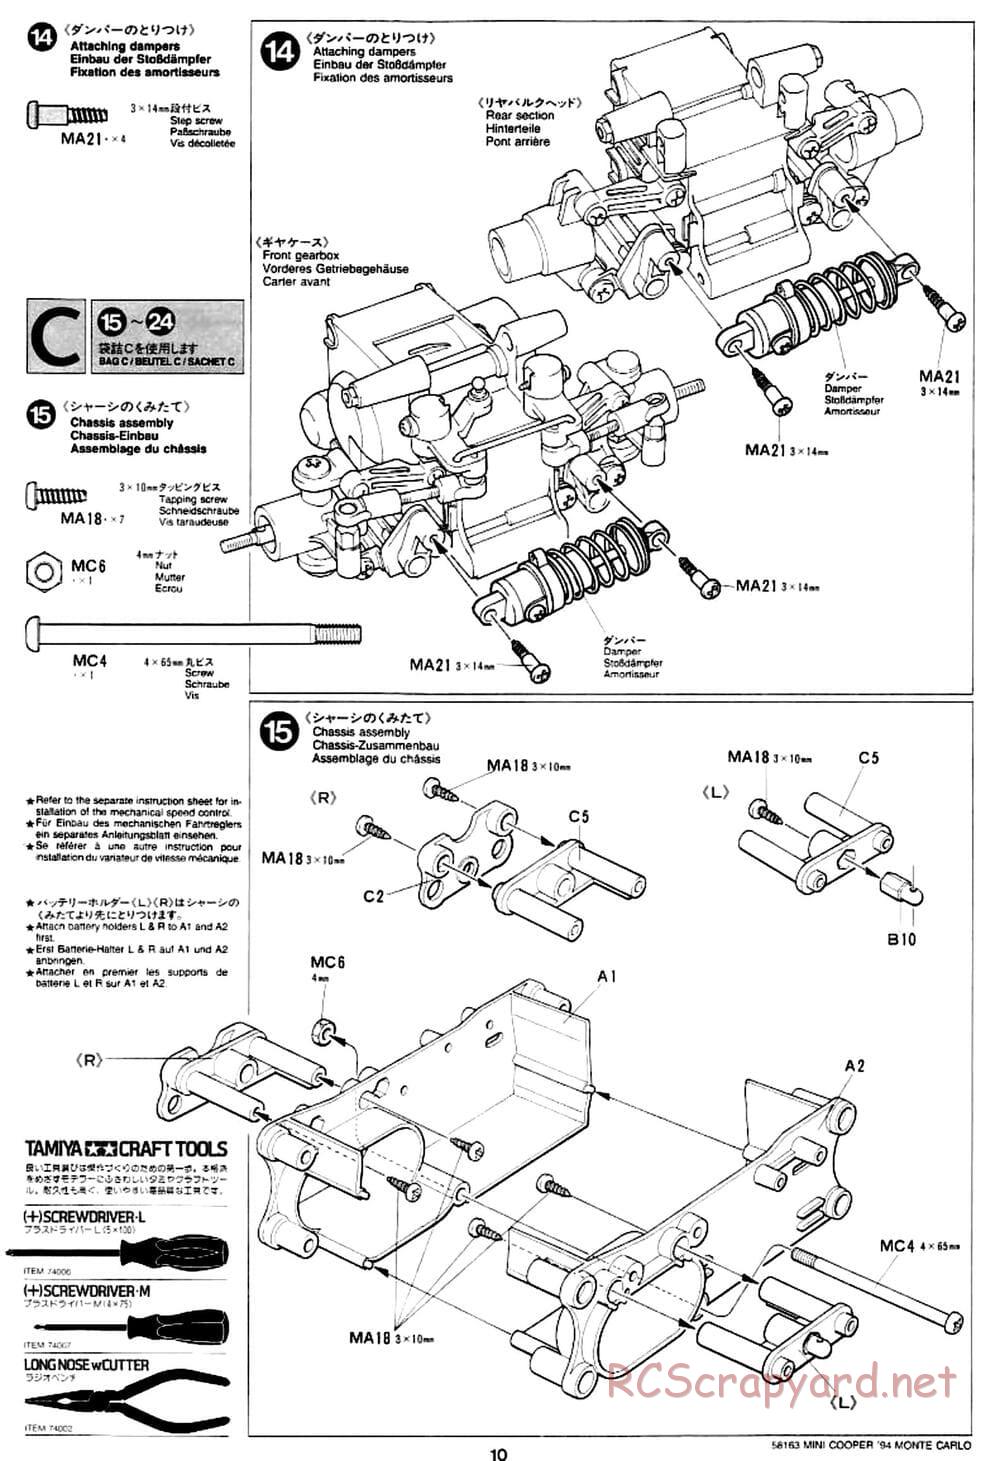 Tamiya - Rover Mini Cooper 94 Monte-Carlo - M01 Chassis - Manual - Page 10